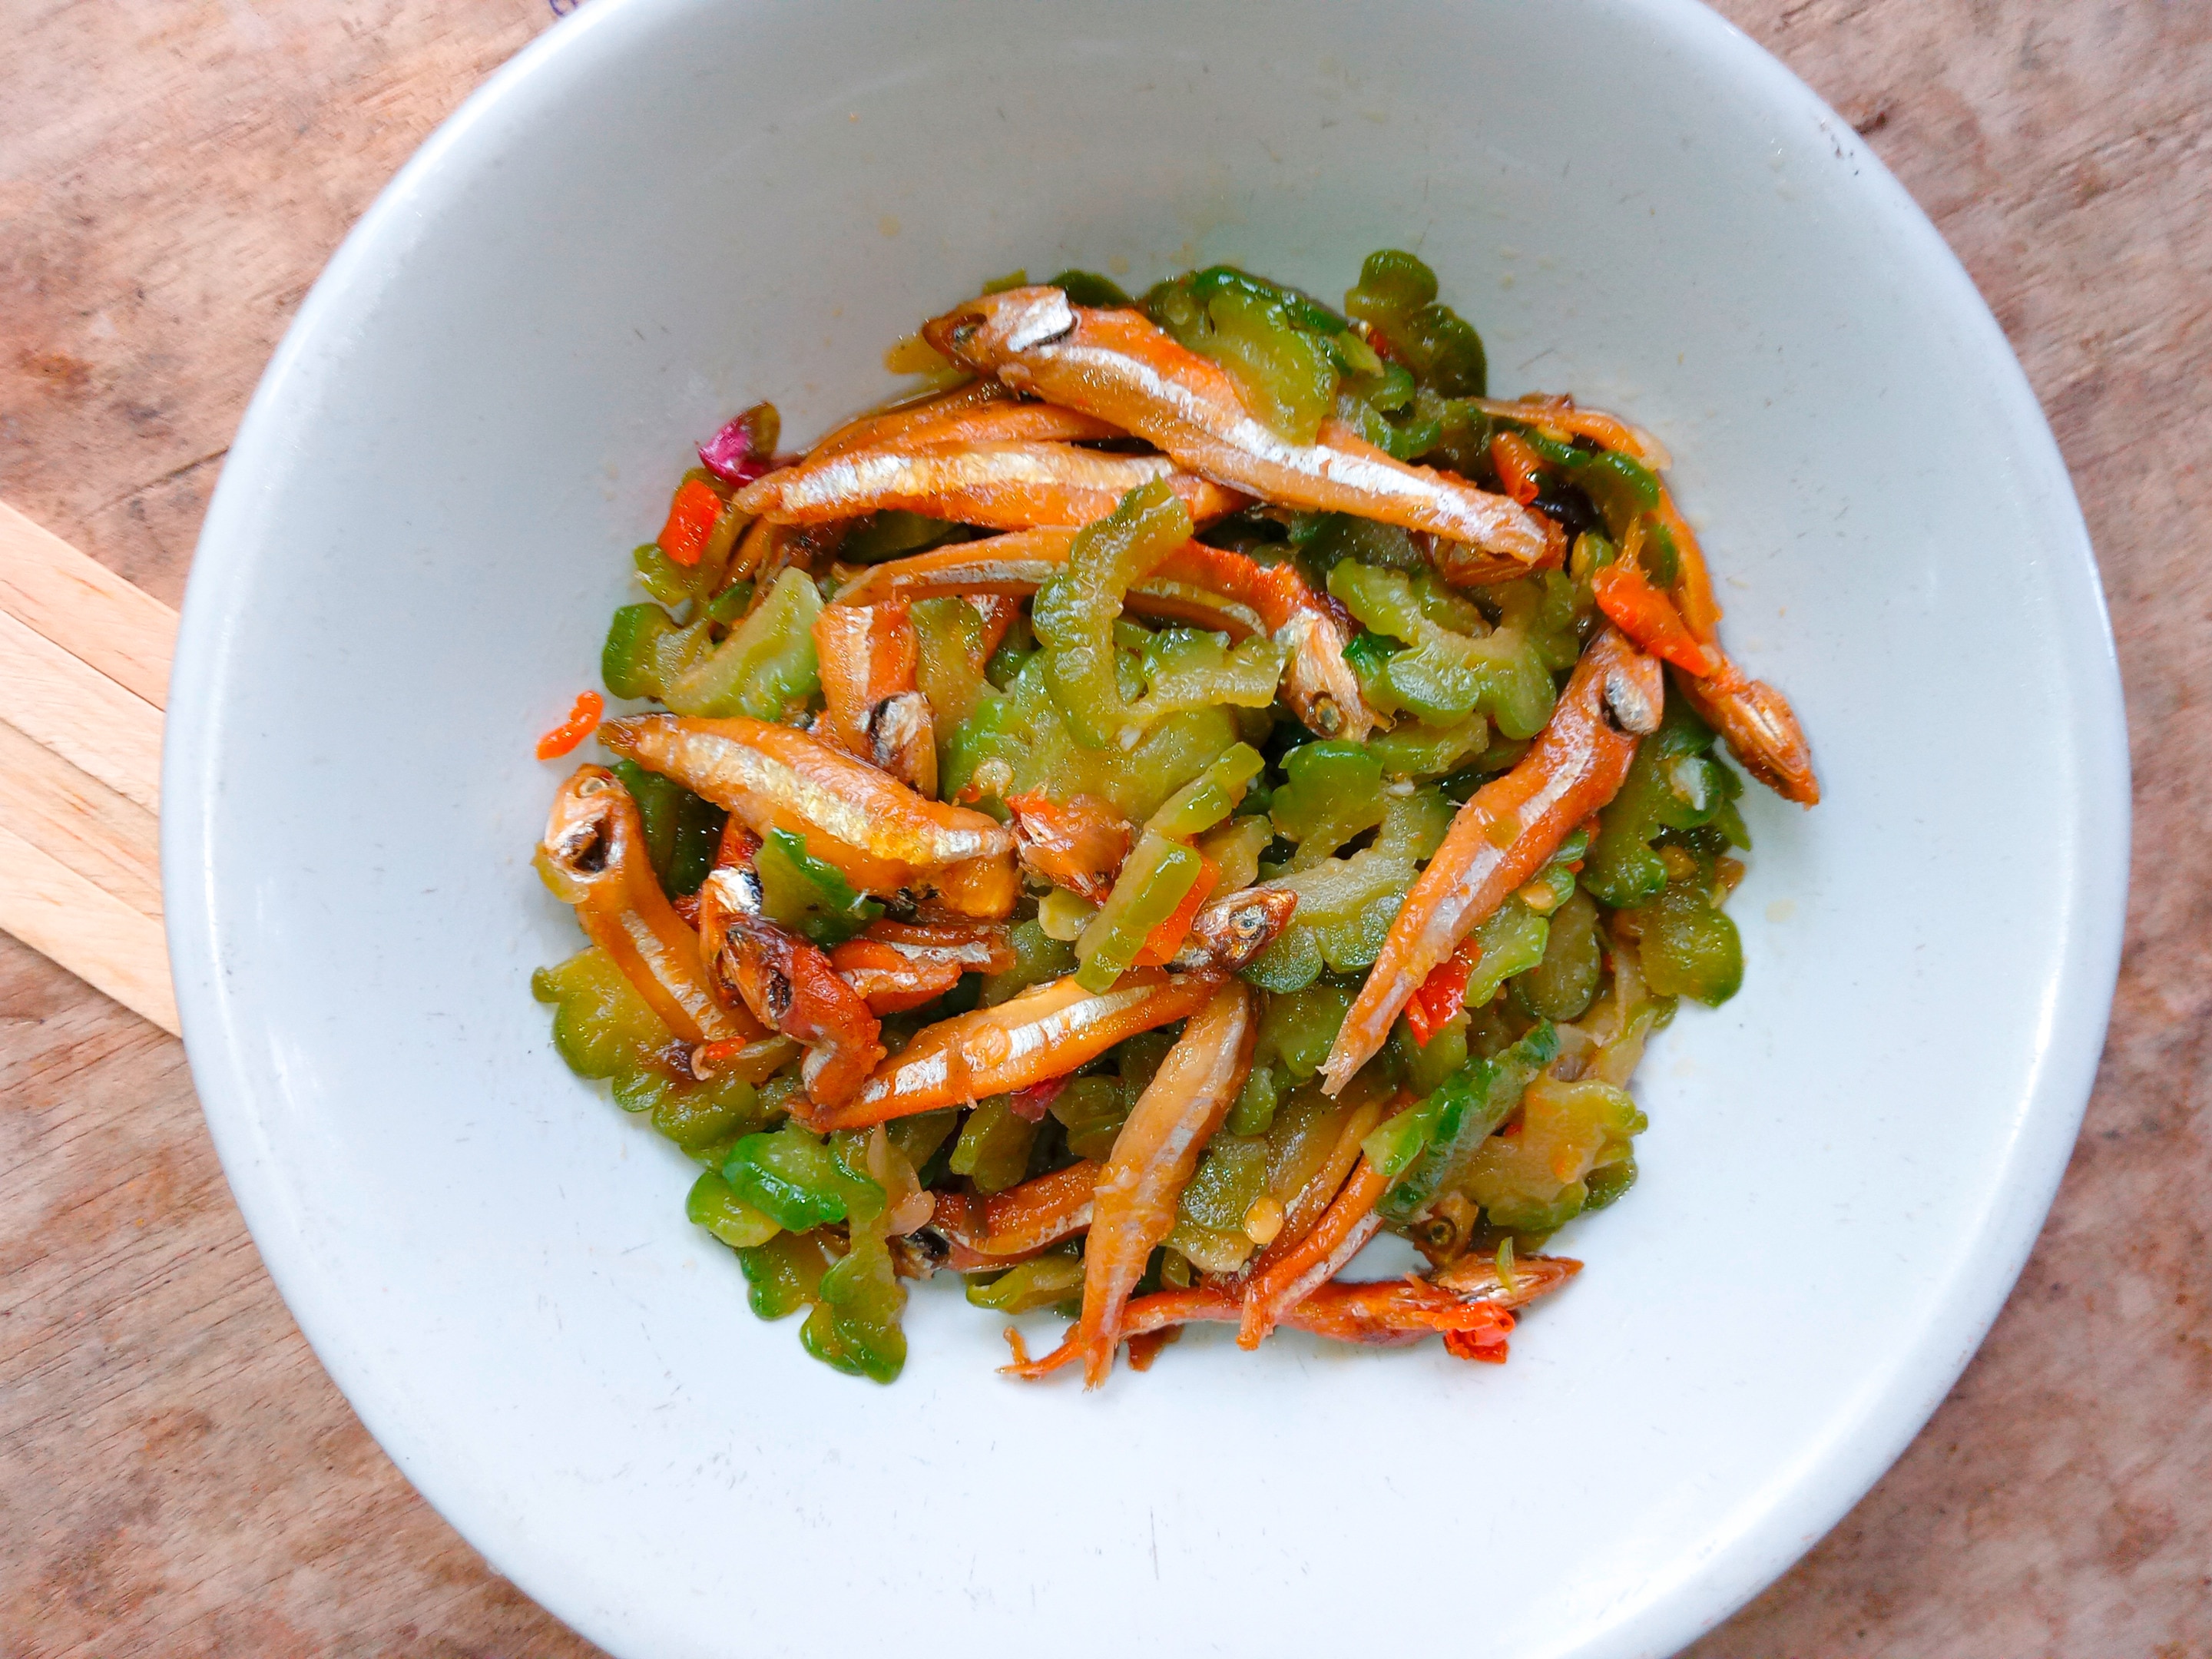 A bowl of ginisang ampalaya topped with fried dilis